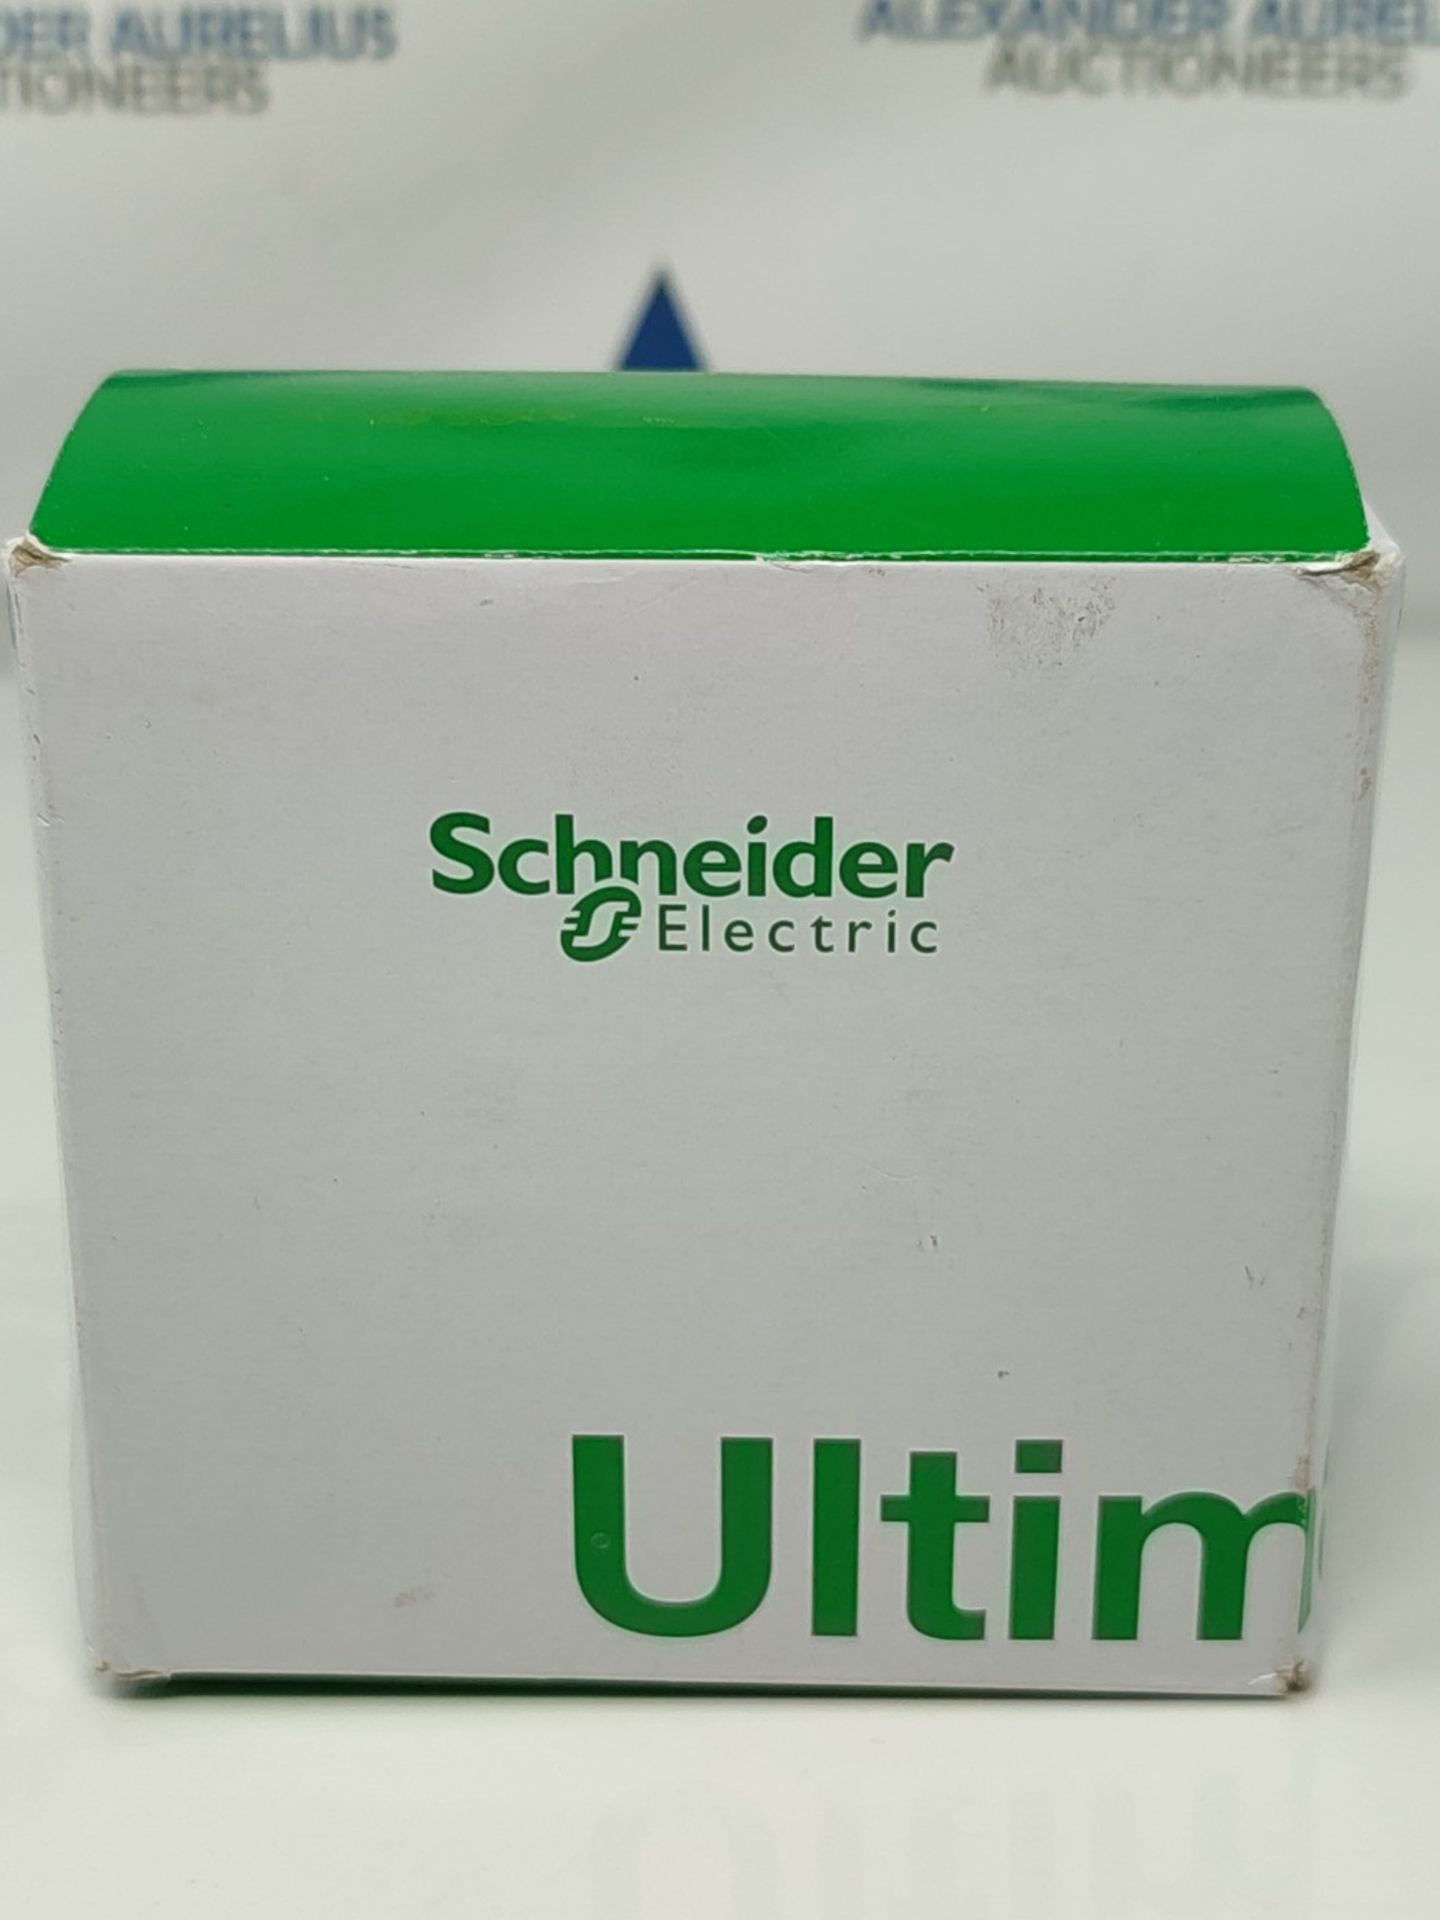 RRP £53.00 Schneider Electric Ultimate Screwless Flat Plate - Double 2 Way Dimmer Light Switch, M - Image 2 of 3